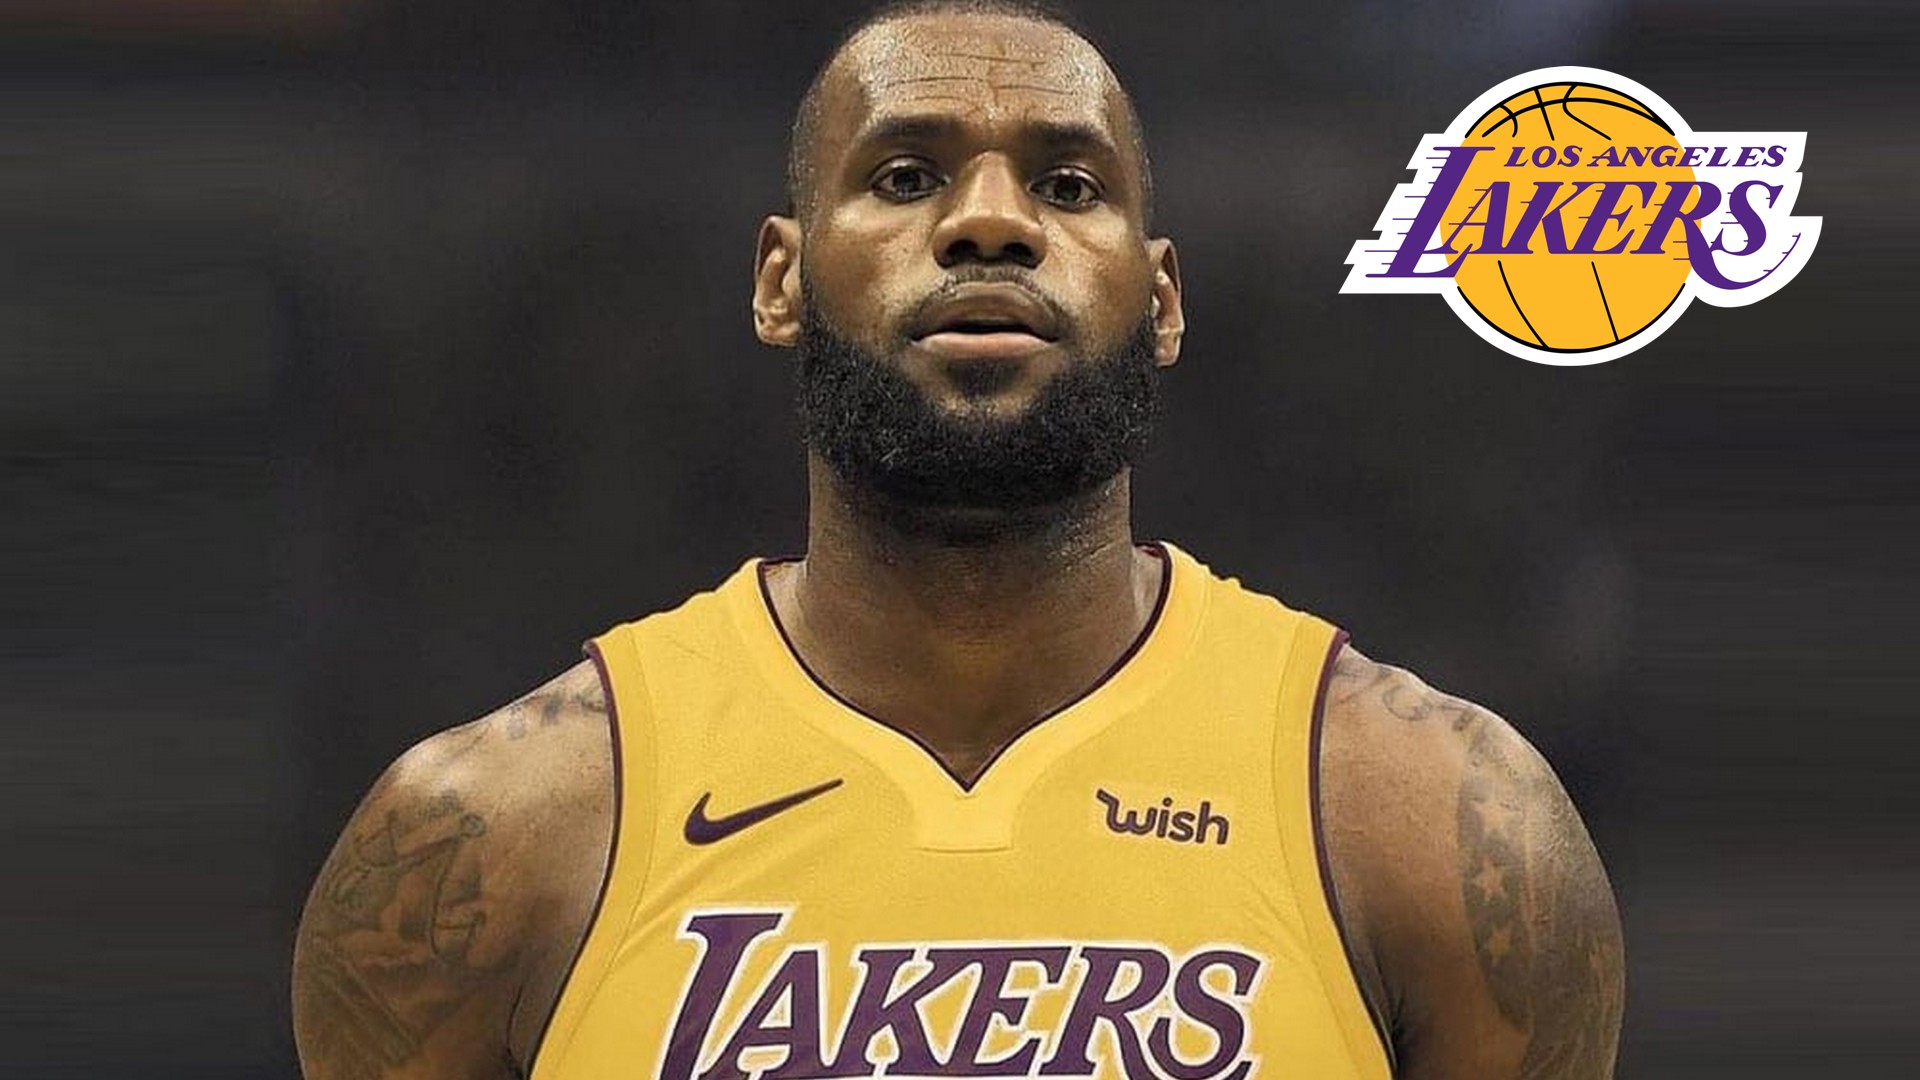 LeBron James Lakers Jersey Wallpaper with image dimensions 1920x1080 pixel. You can make this wallpaper for your Desktop Computer Backgrounds, Windows or Mac Screensavers, iPhone Lock screen, Tablet or Android and another Mobile Phone device